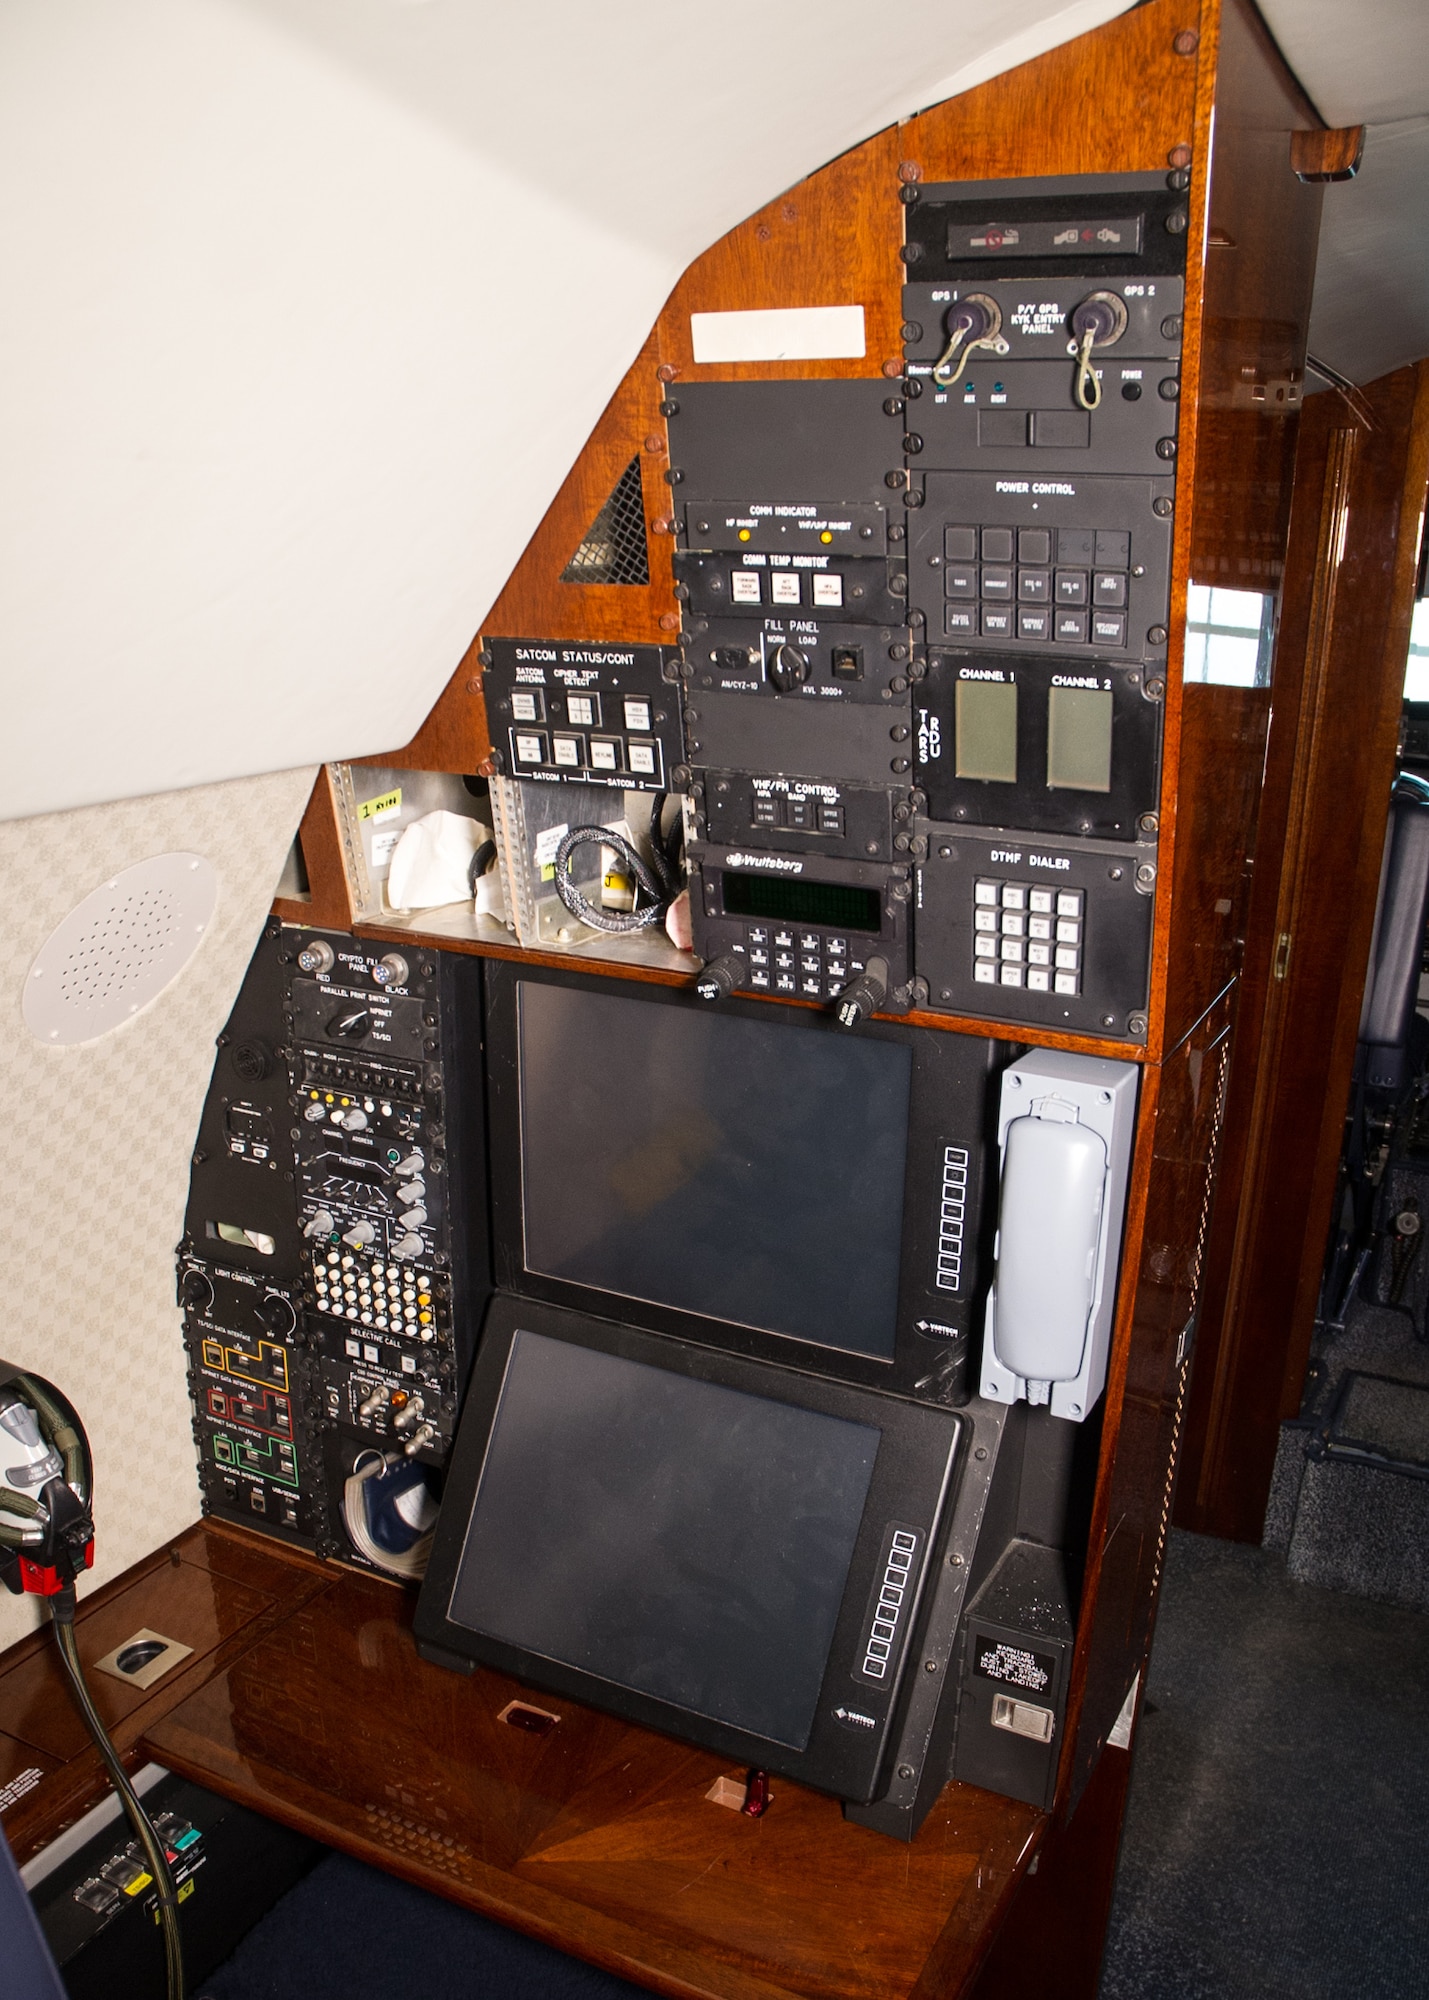 DAYTON, Ohio -- Gulfstream Aerospace C-20B interior view in the Presidential Gallery at the National Museum of the United States Air Force. (U.S. Air Force photo by Ken LaRock)